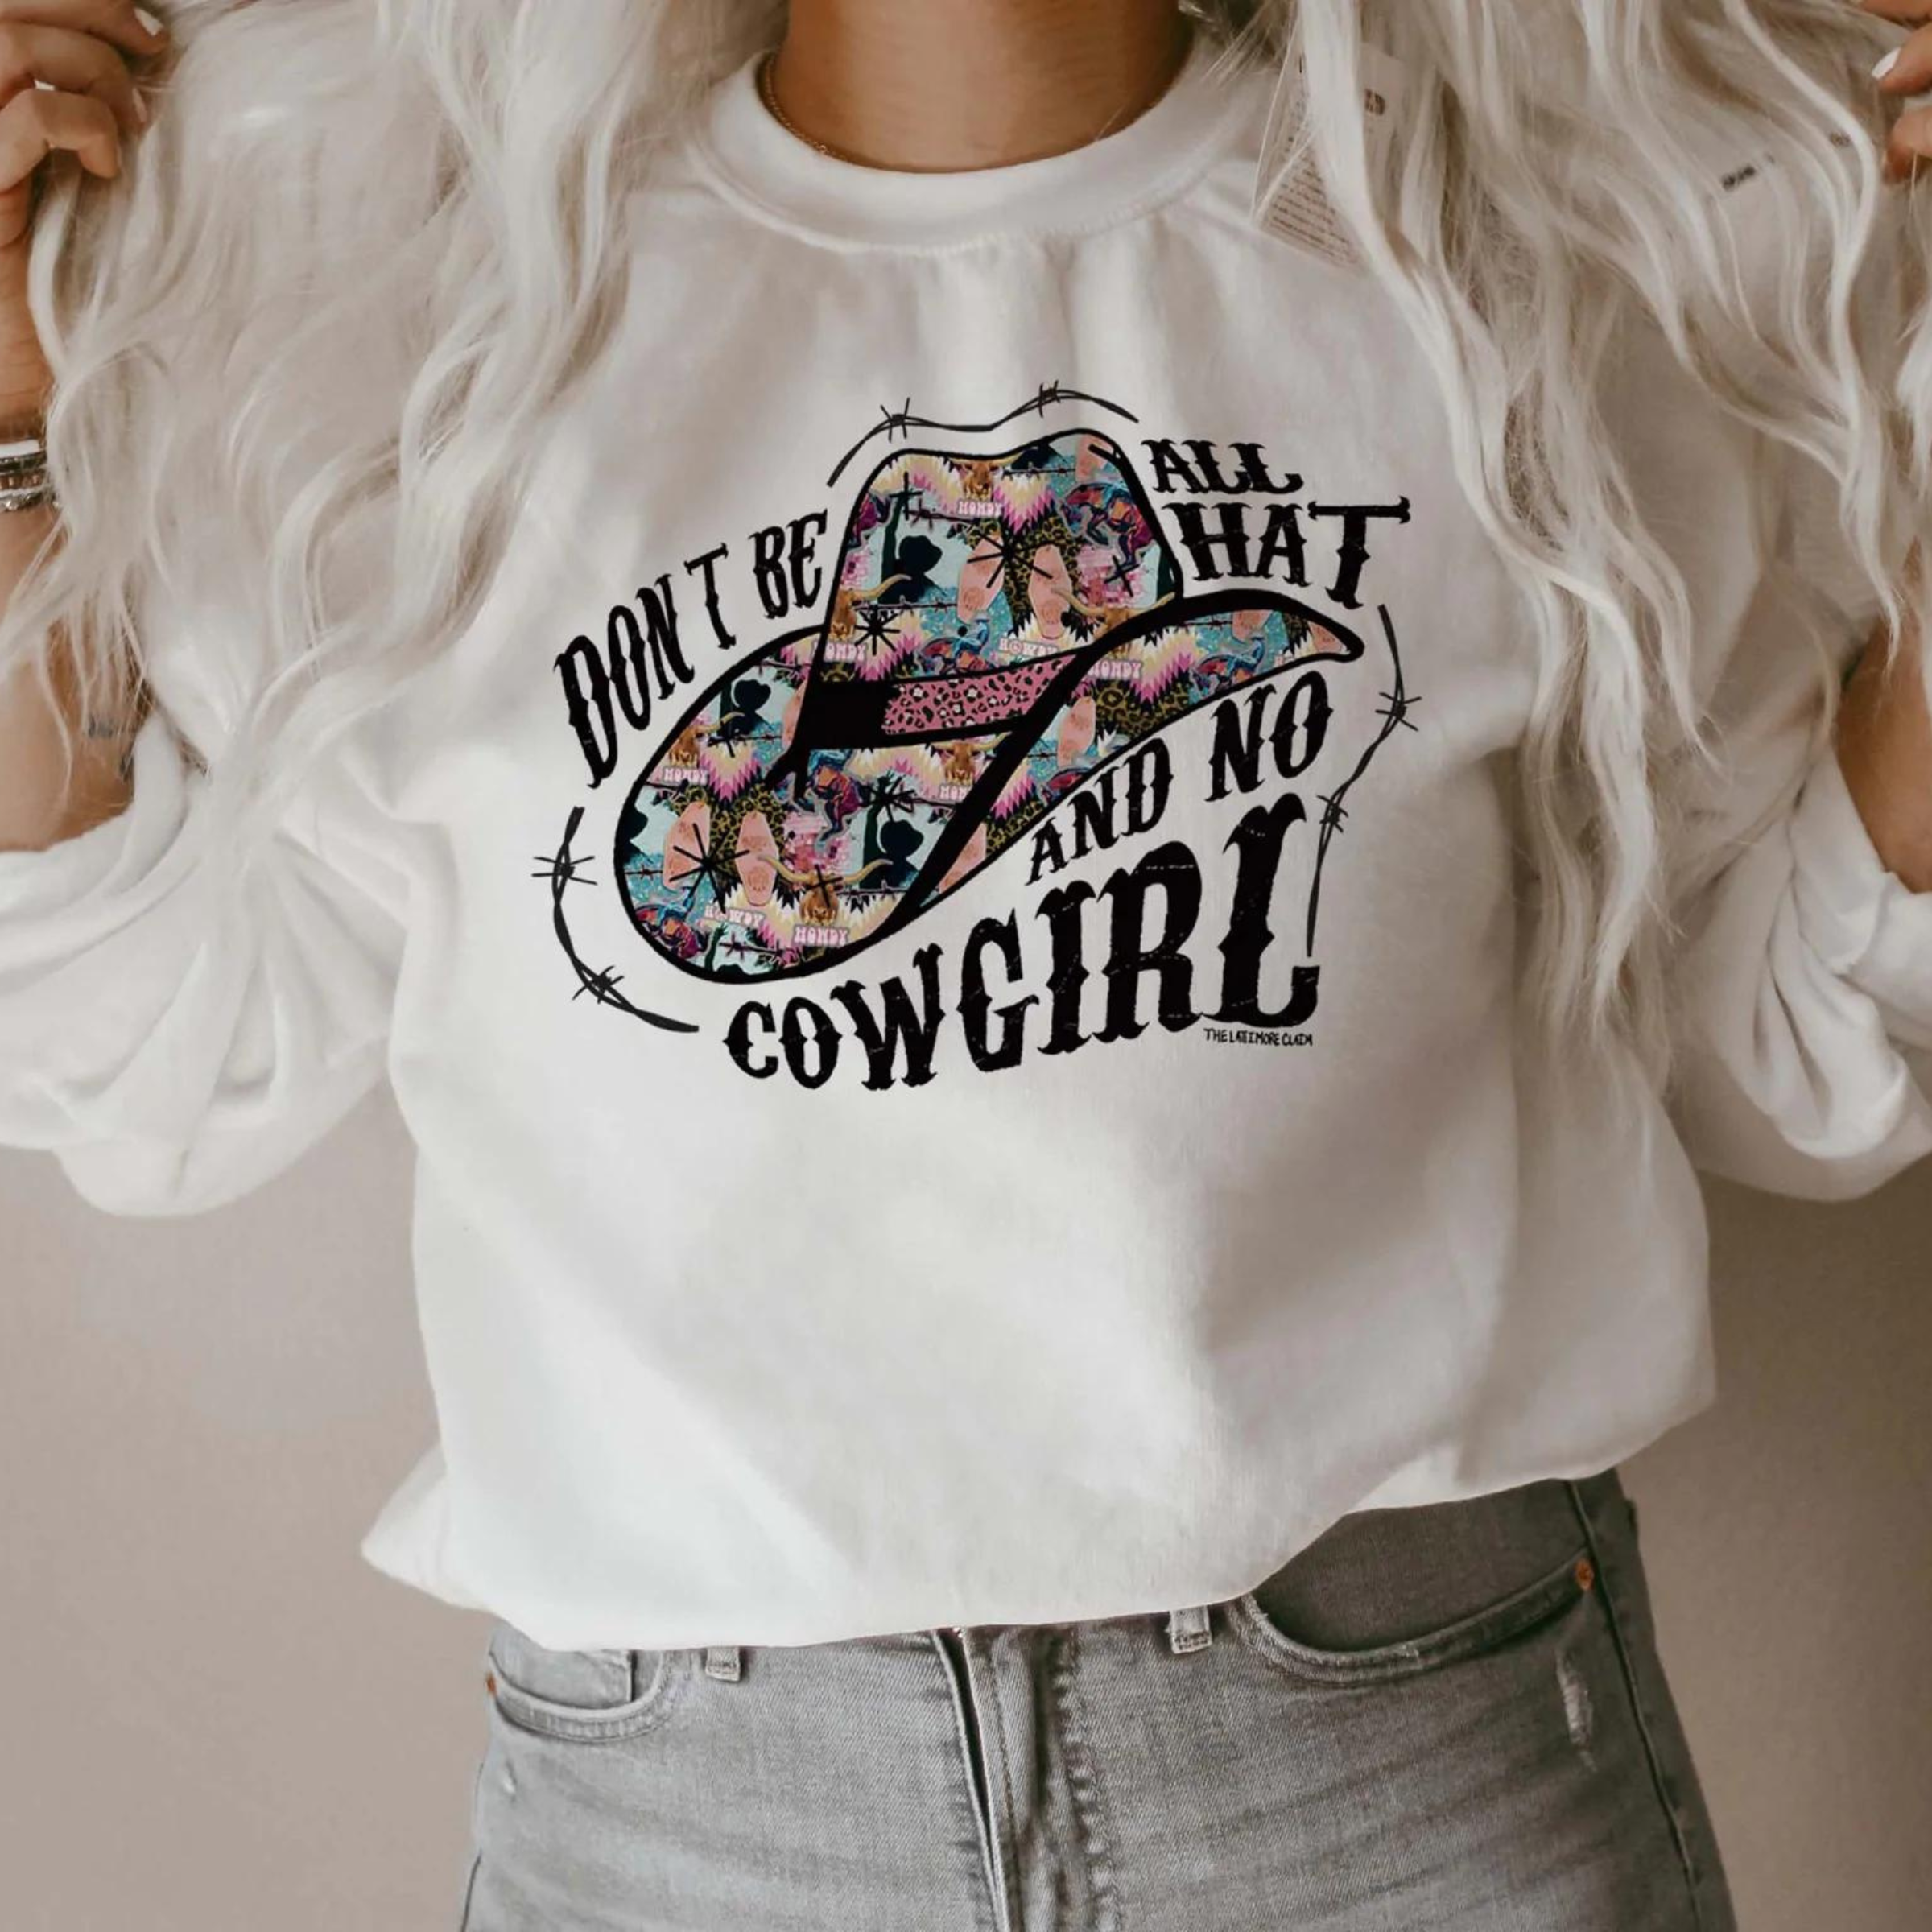 This white sweatshirt includes a crew neckline, long sleeves, and cute hand drawn design. of a cowboy hats when fun + bright prints, and the words "Don't Be All That And No Cowgirl". It also has black barbwire intertwined with the words and around the hat. This sweatshirt is shown in this photo to be styled with denim jeans and silver jewelry. The model has also rolled the sleeves. 